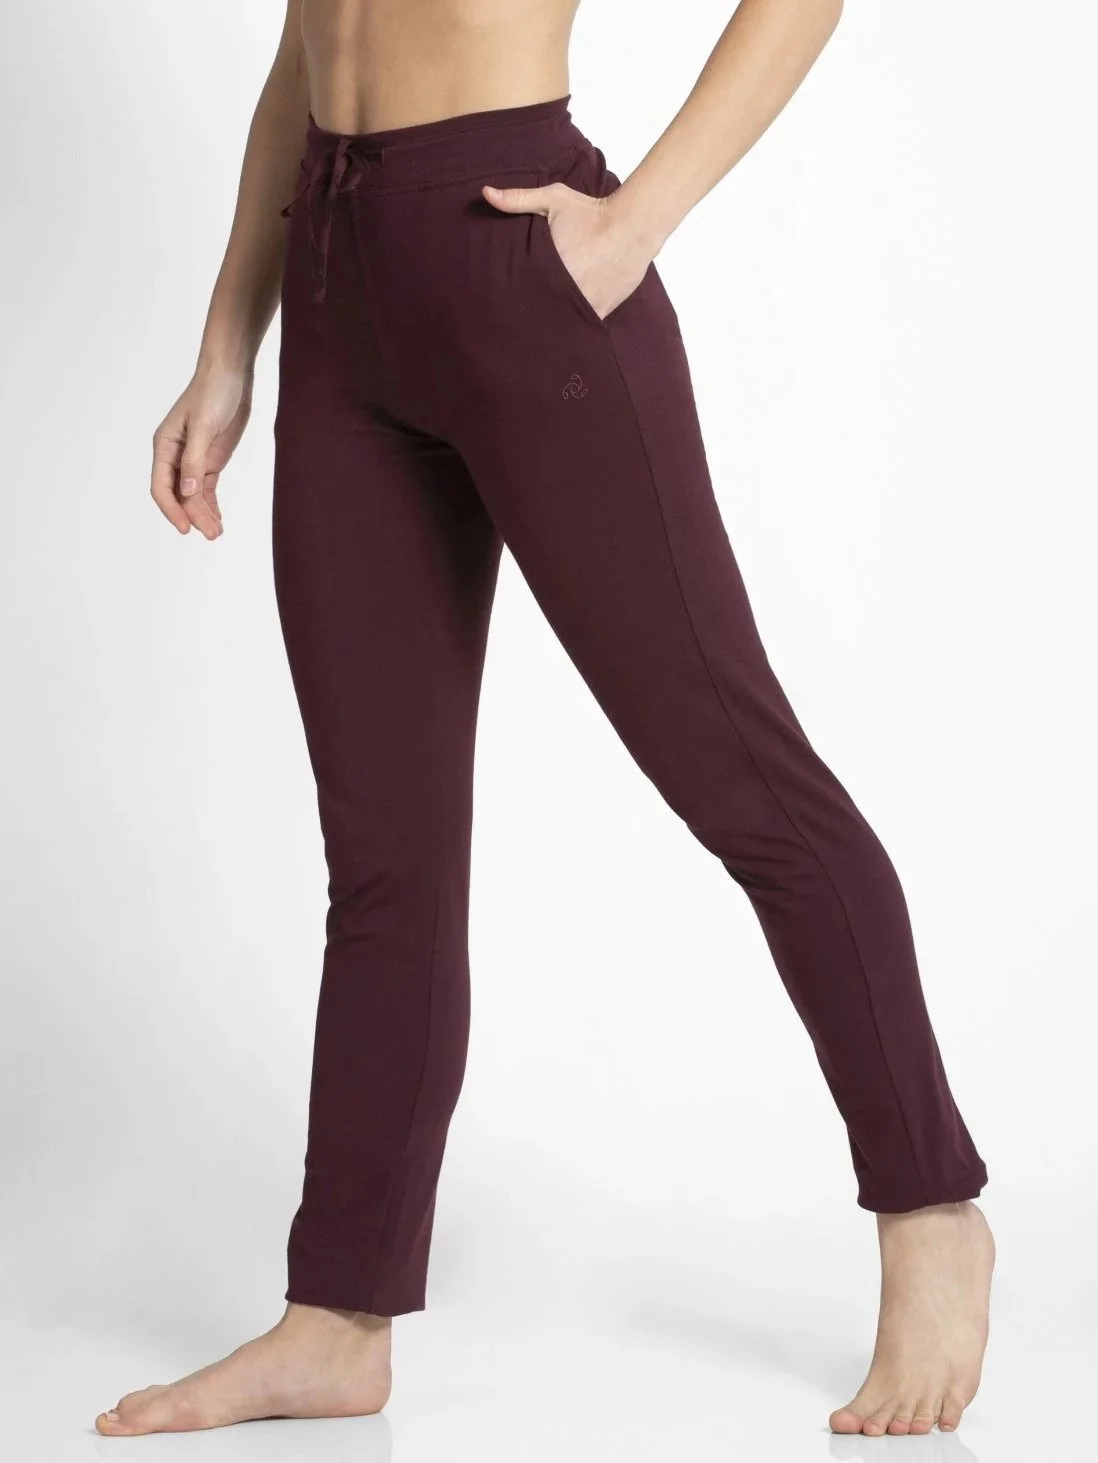 Jockey Rose Wine Track Pant for Women #1302 at Rs 879.00